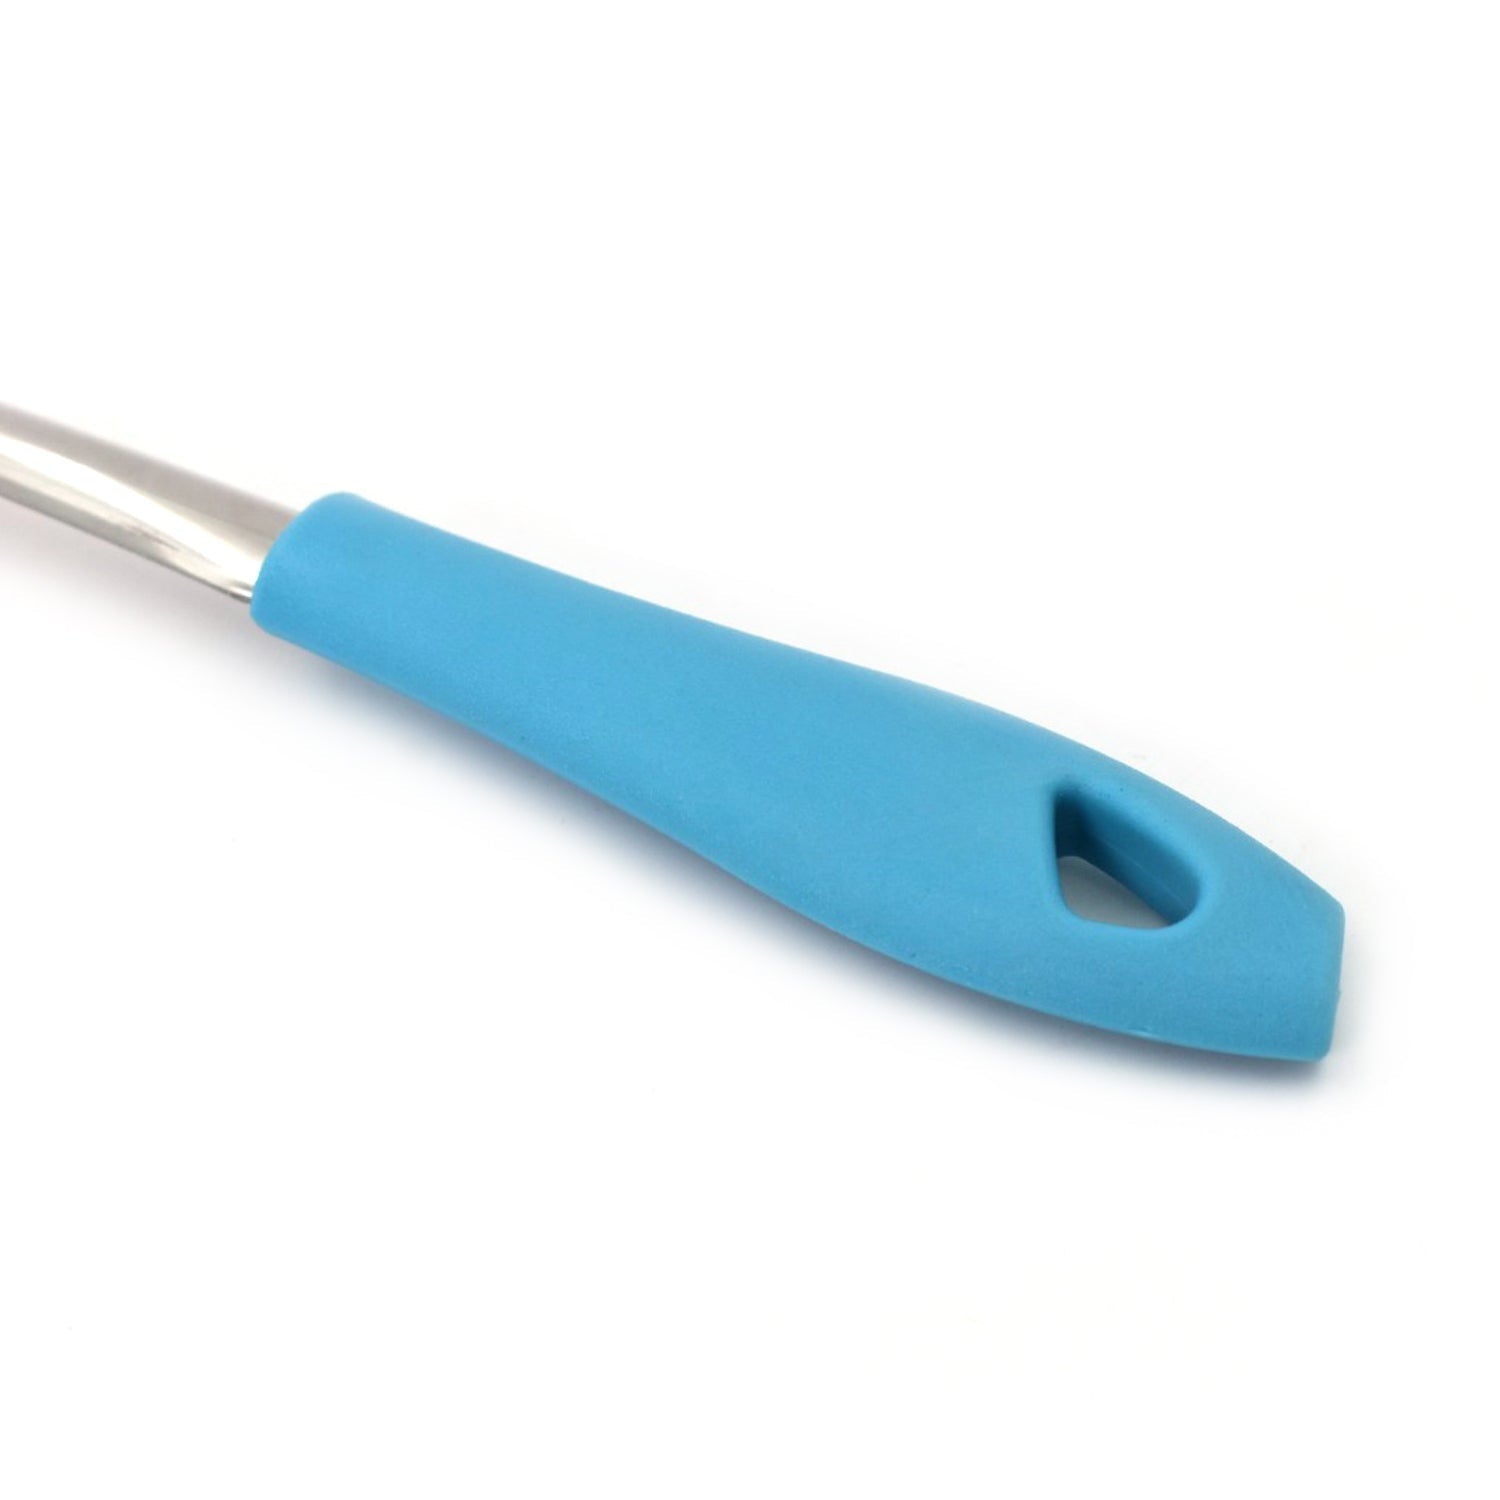 7038 SS Deep Serving Spoon N 1 used in all kinds of household and official places for serving and having food stuffs and items.